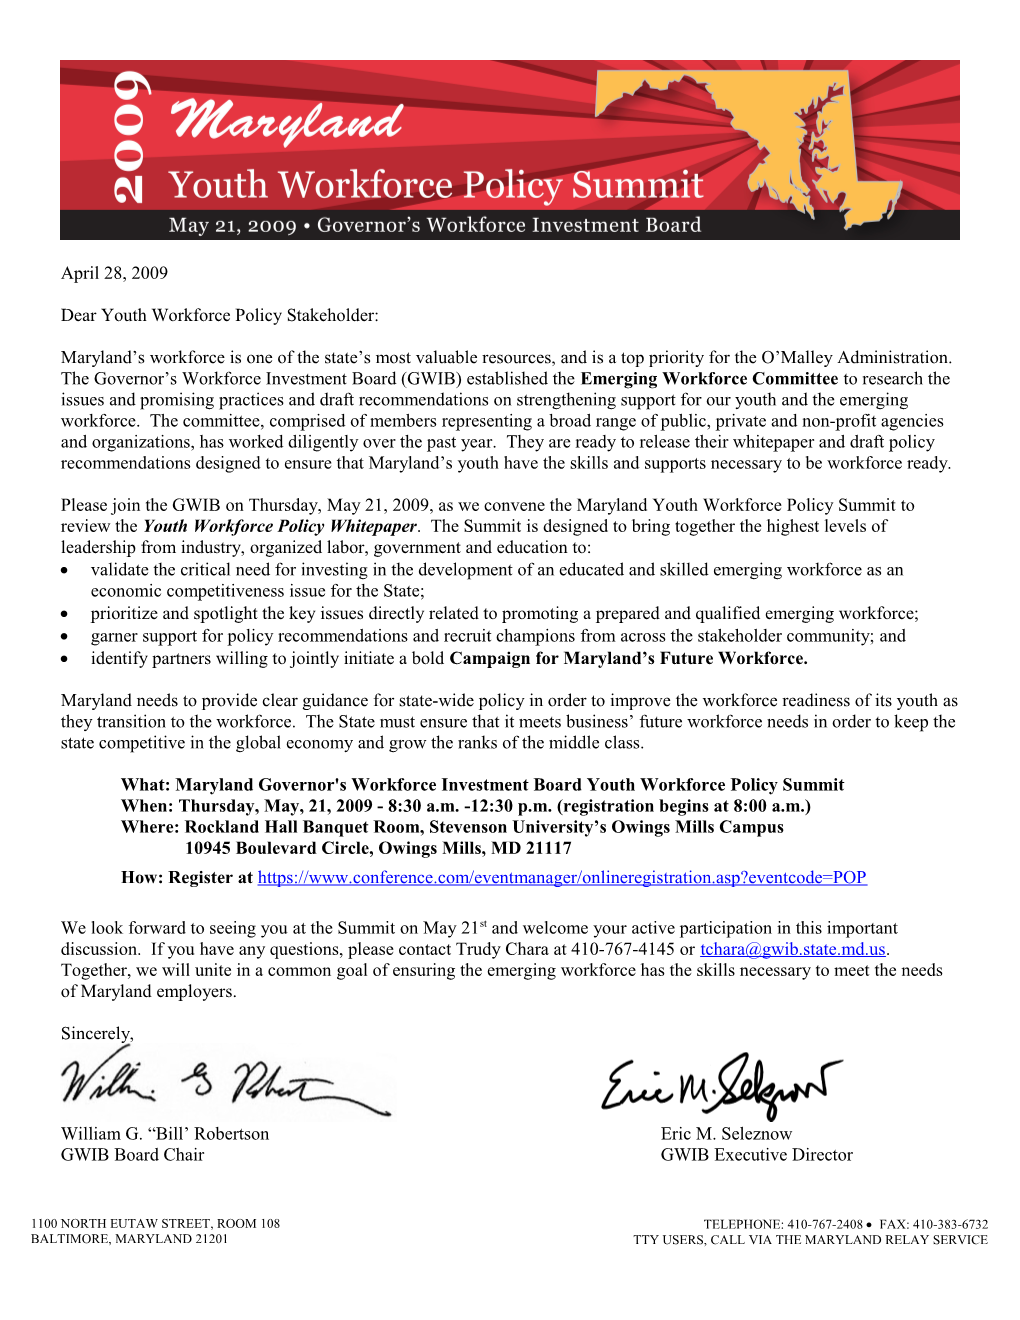 Dear Youth Workforce Policy Stakeholder